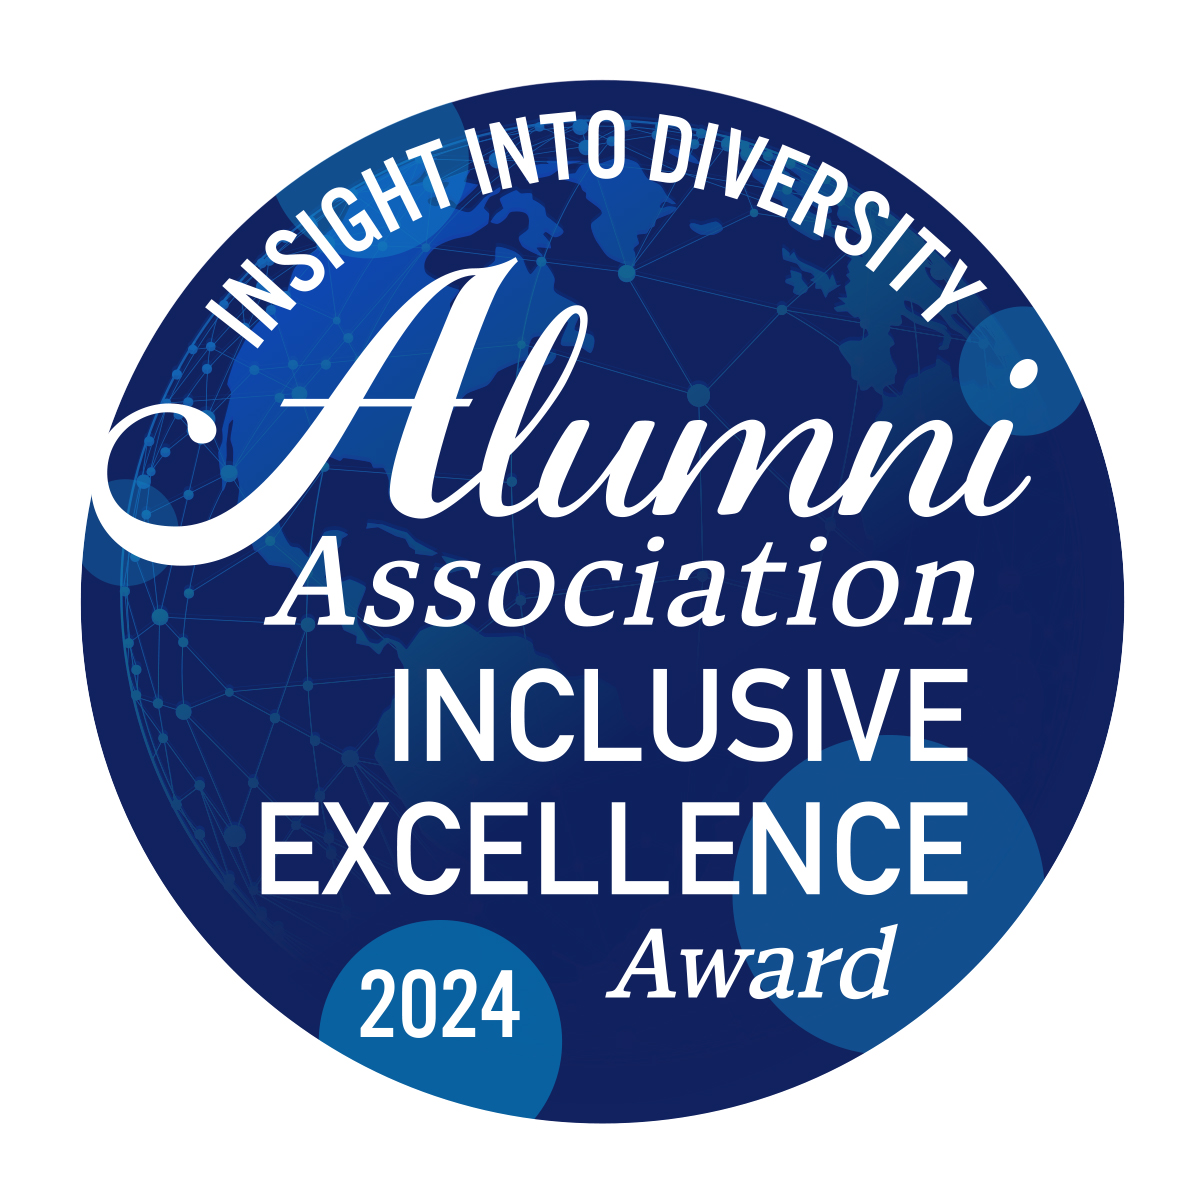 The WKU Alumni Association received the 2024 Alumni Association Inclusive Excellence Award from Insight into Diversity magazine. Read more about the Alumni Association Inclusive Excellence Award at bit.ly/3JqjaLz